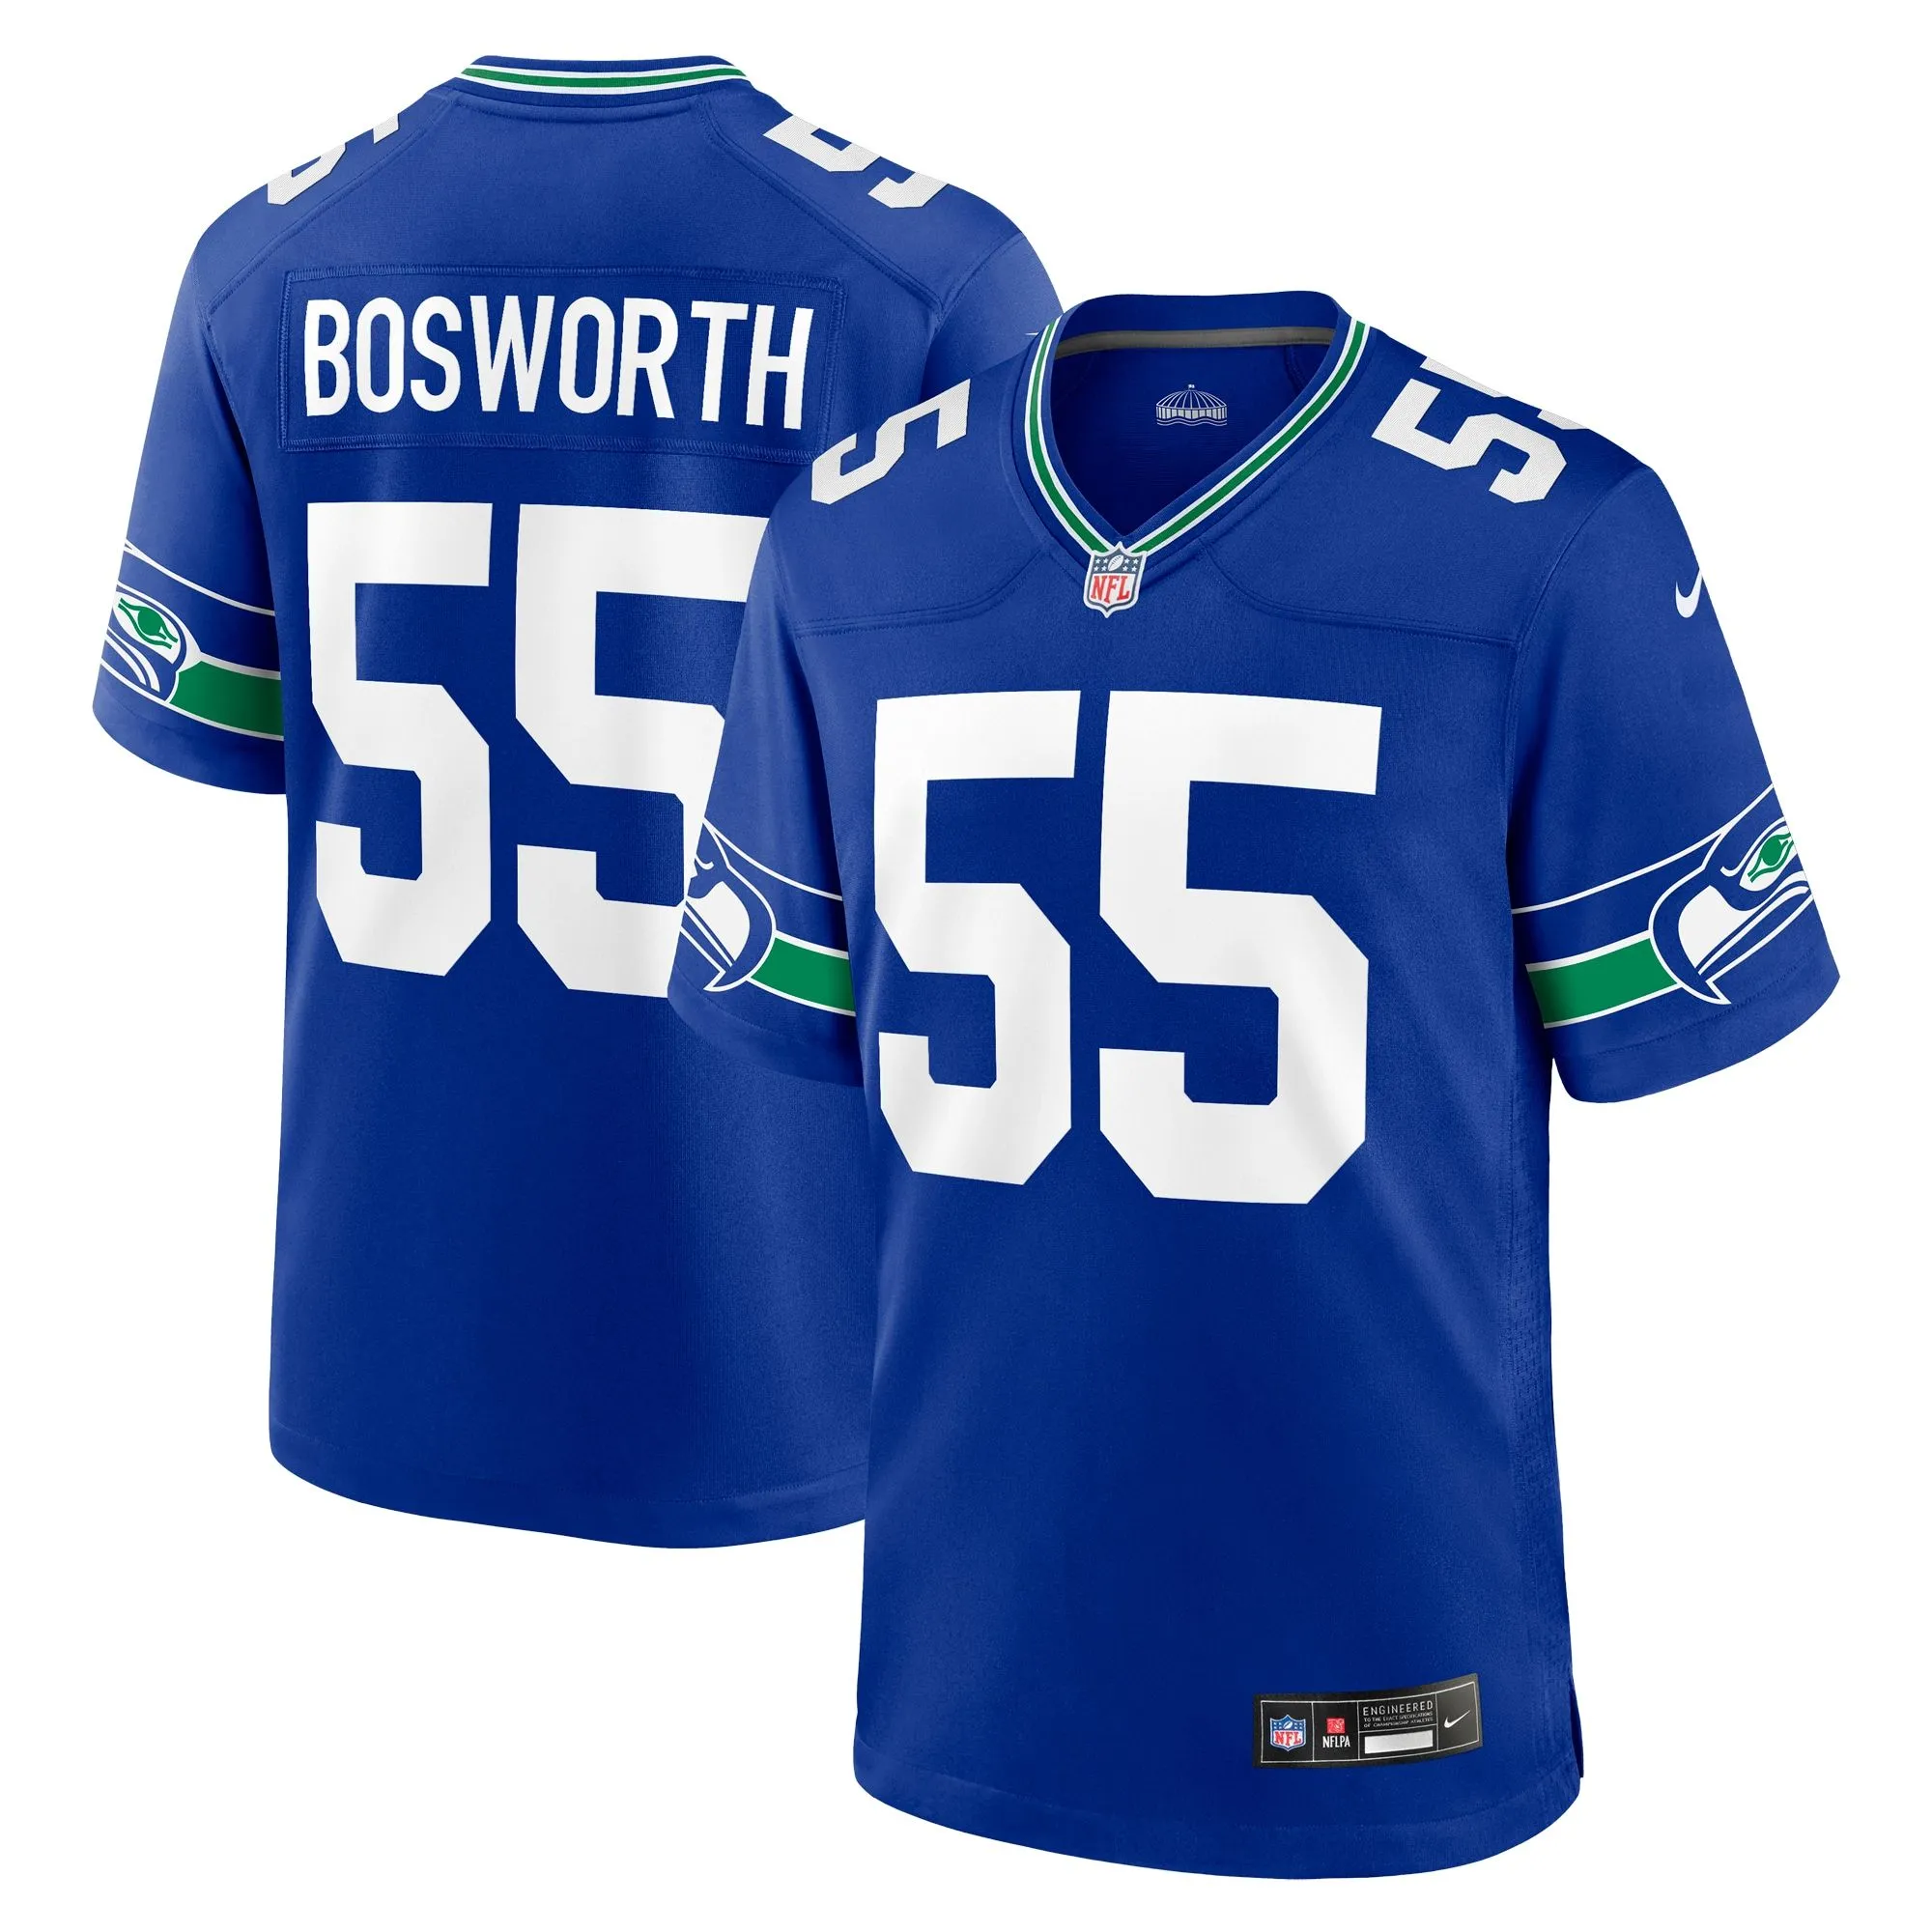 Brian Bosworth Seattle Seahawks  Throwback Retired Player Game Jersey - Royal